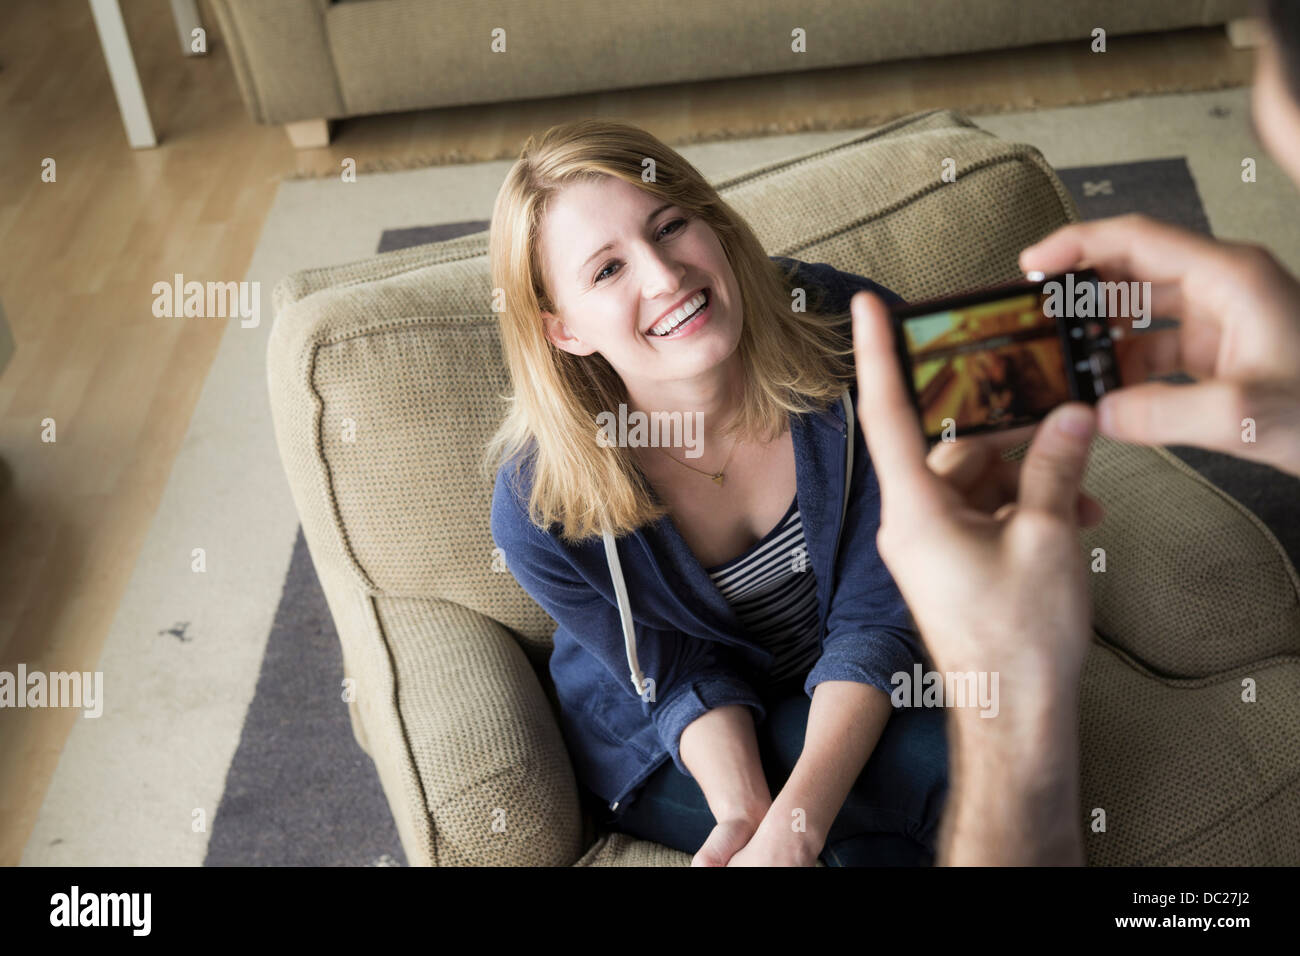 Man photographing young woman on cell phone Stock Photo